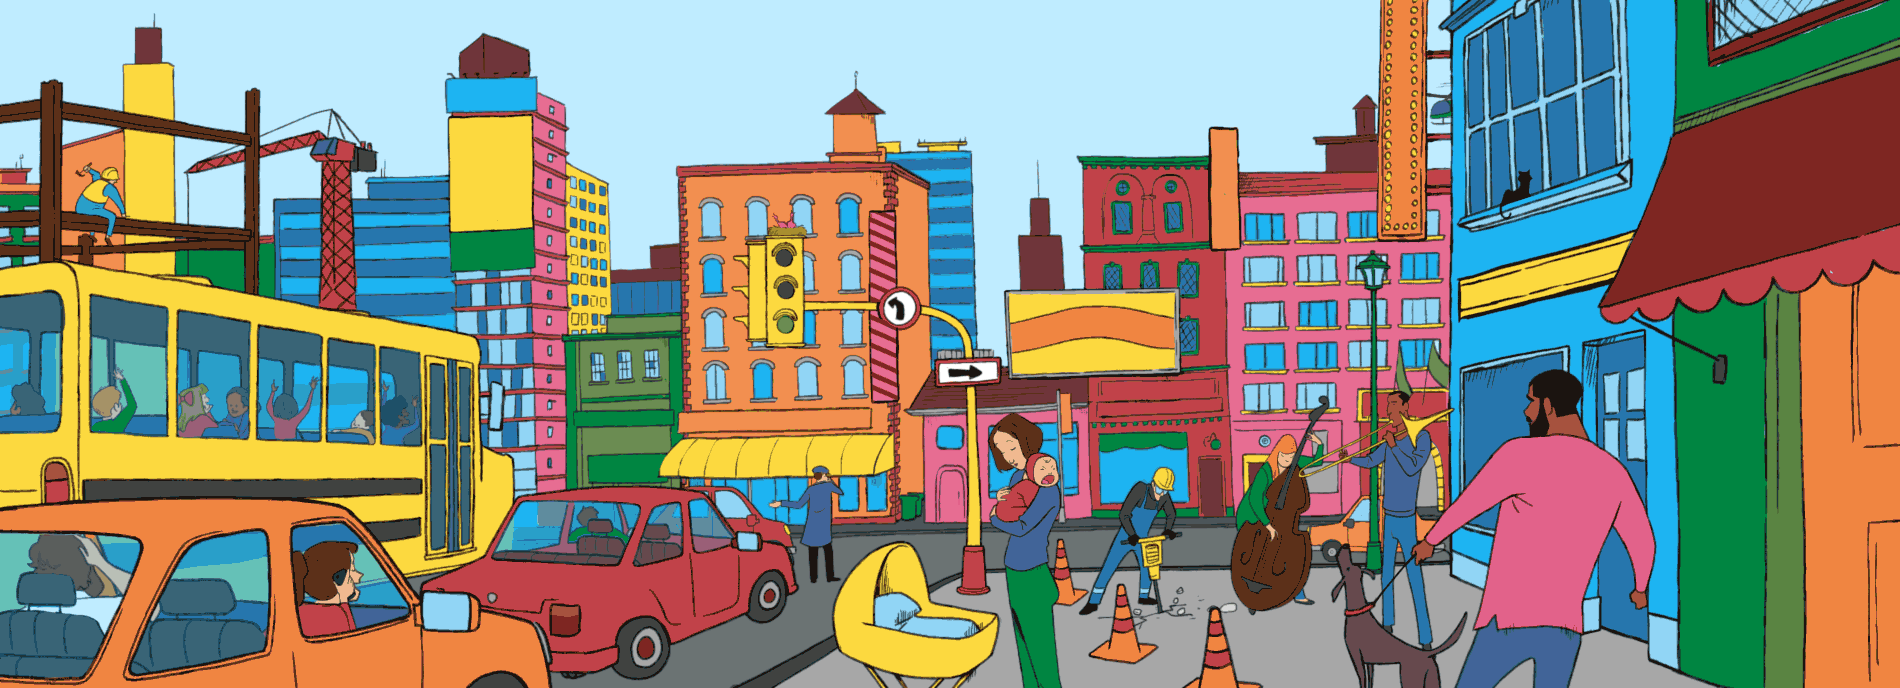 Animation: A woman holding a crying baby stands on a busy street corner. Around her, there are cars driving, people walking, a bustling city.